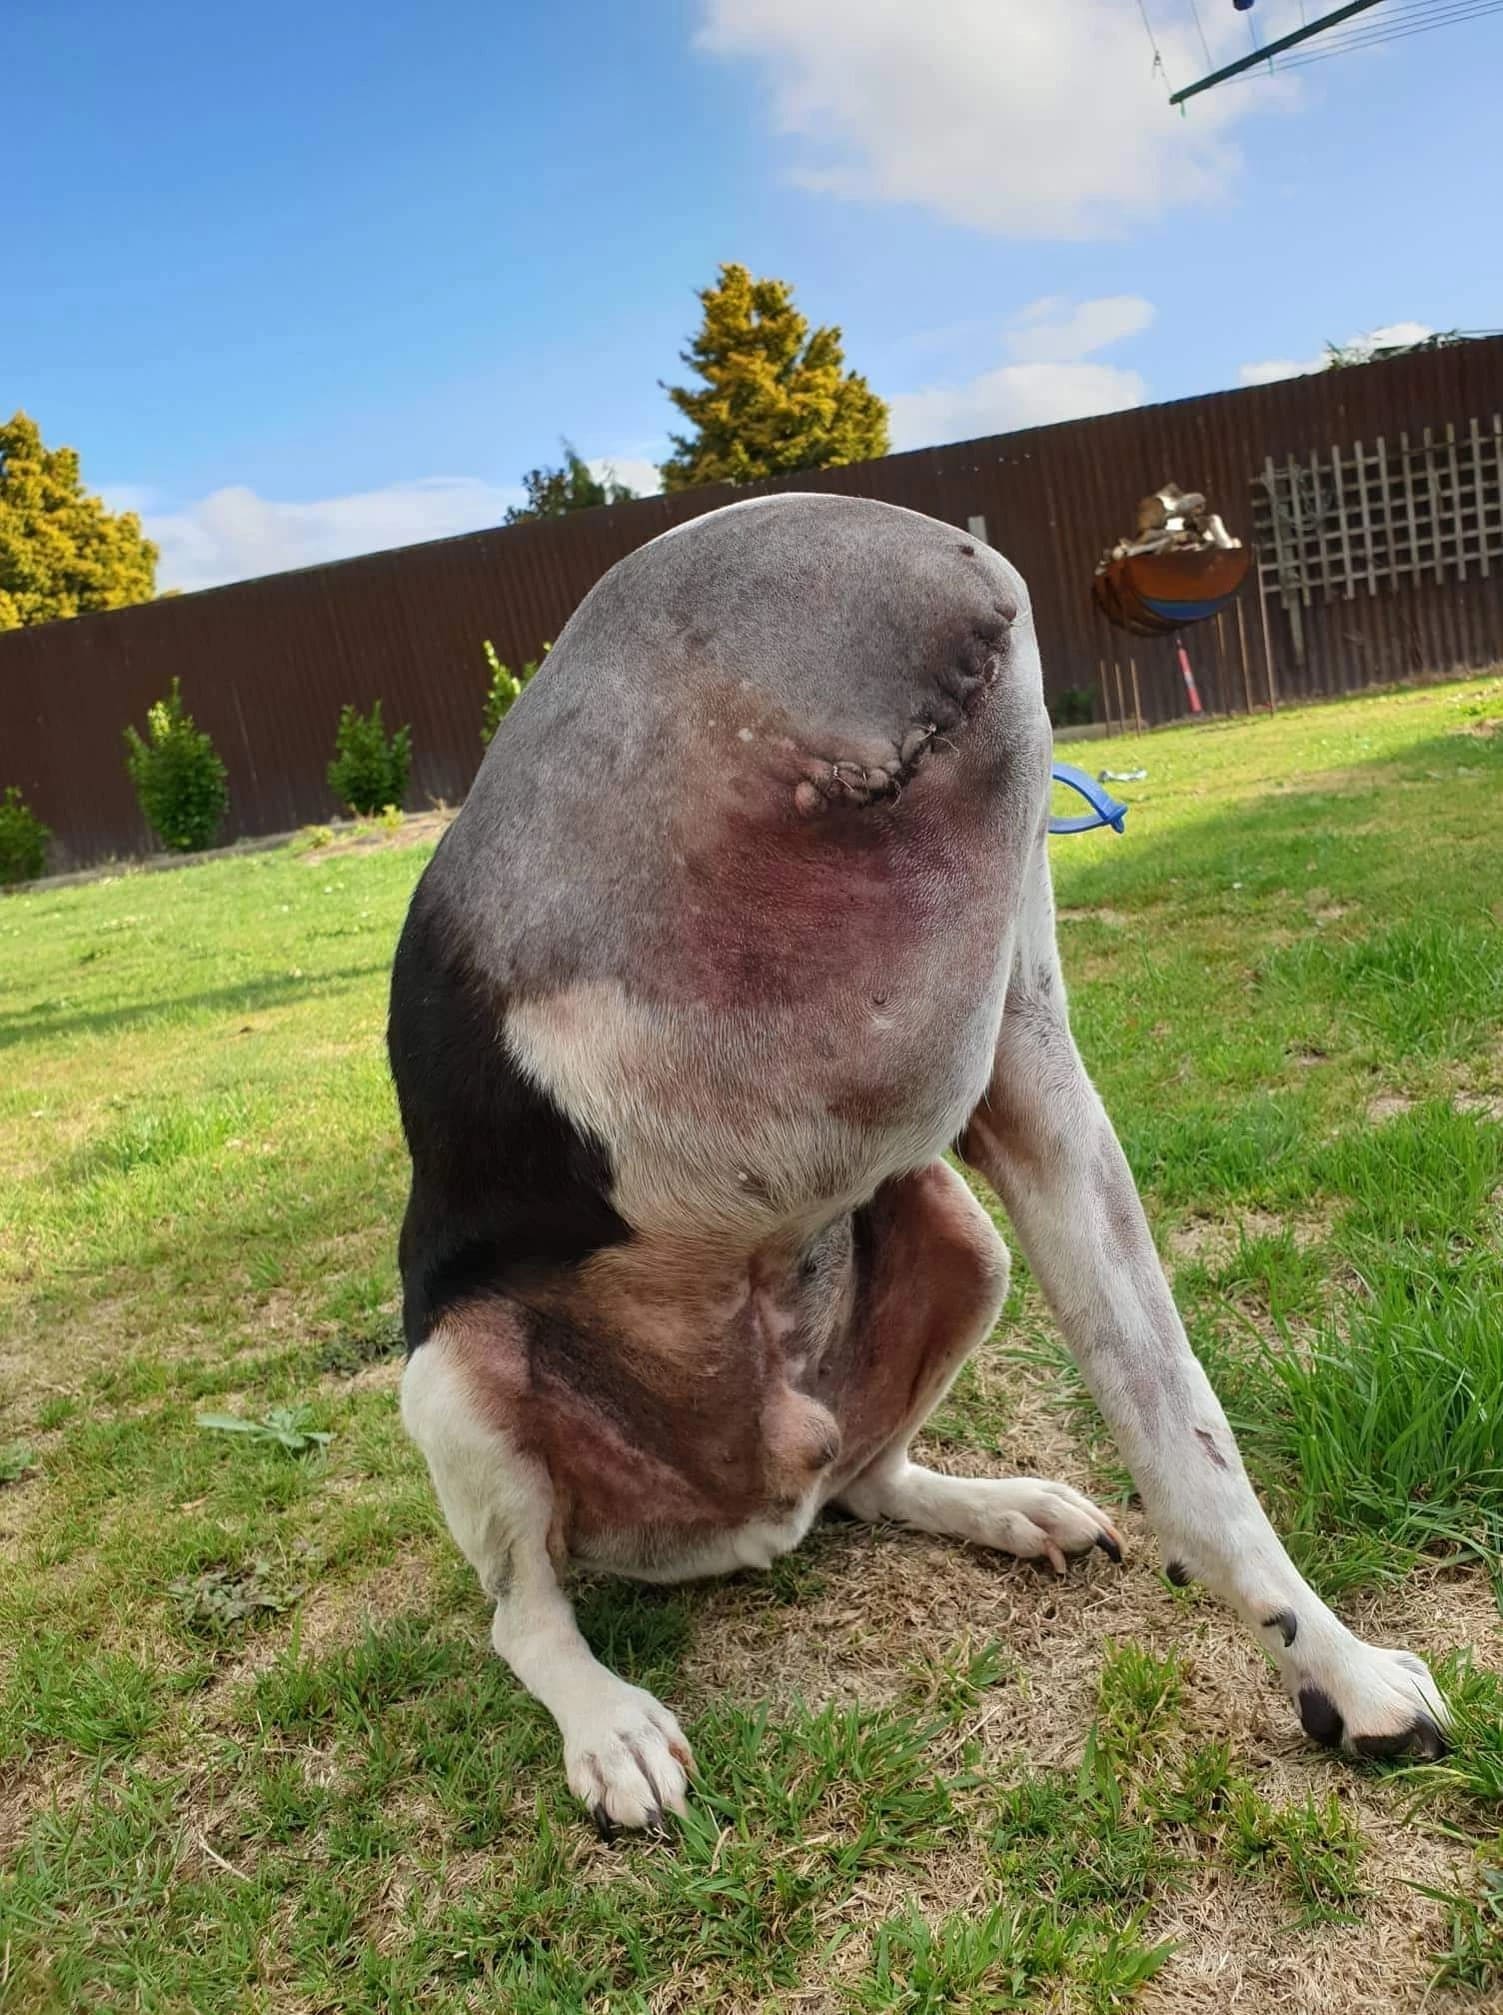 Many People Are Struggling to Make Sense of This Picture Showing a Dog Without a Head